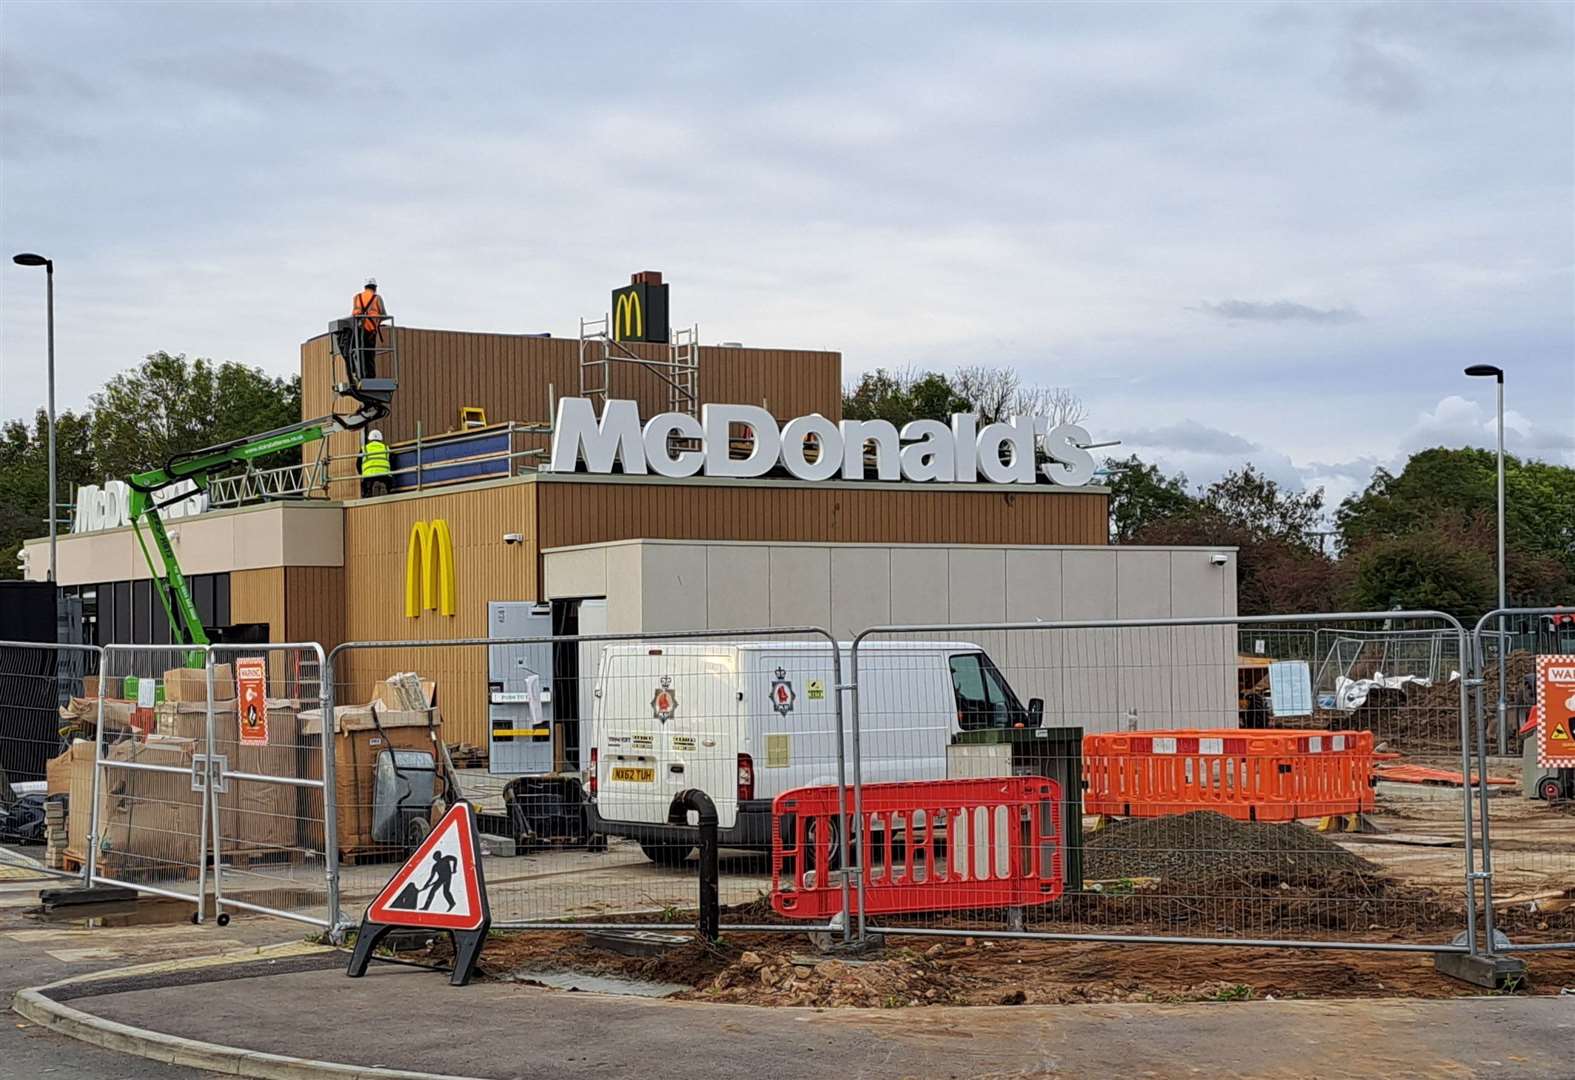 The McDonald's in Sandwich got a licence to serve into the small hours